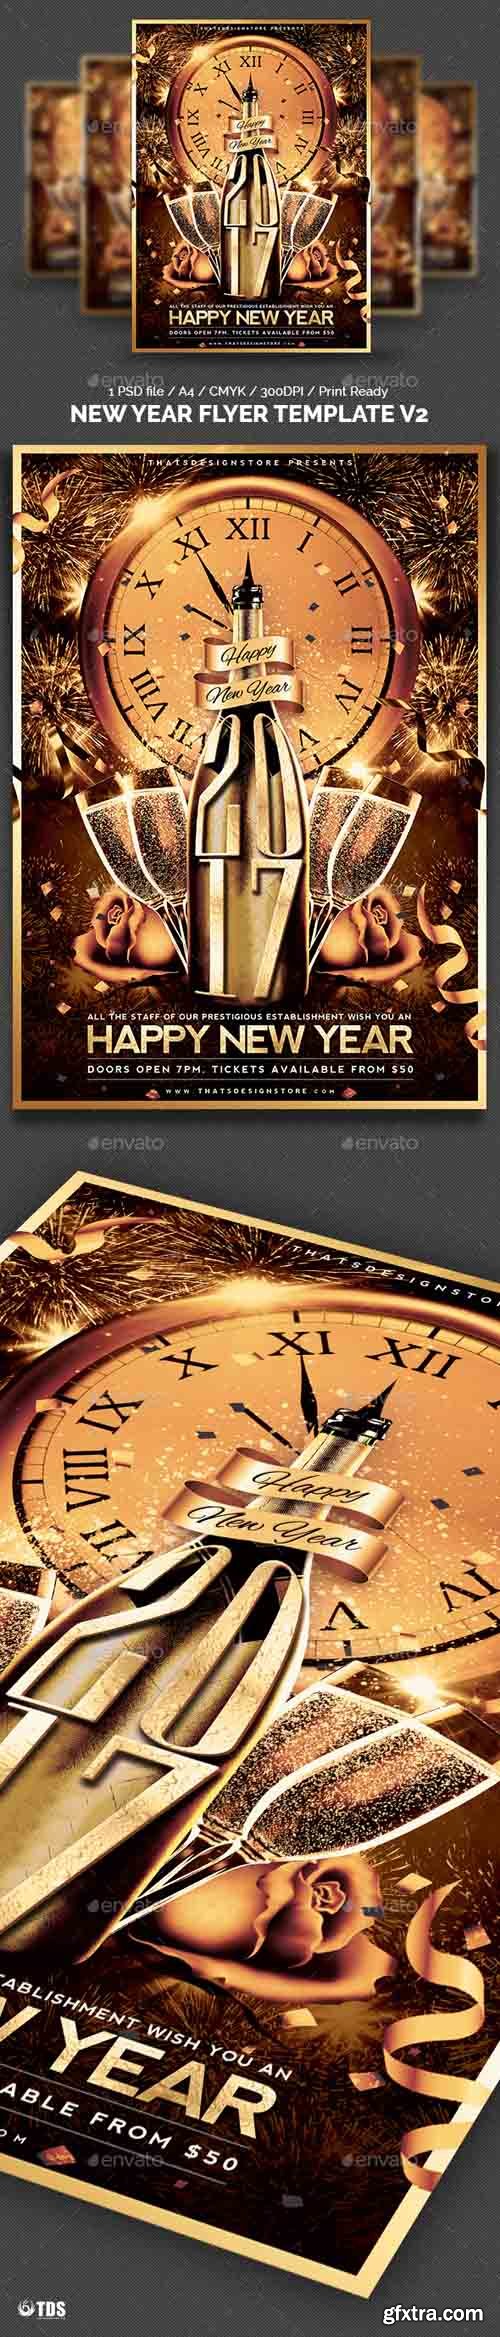 GR - New Year Flyer Template V2 17829516